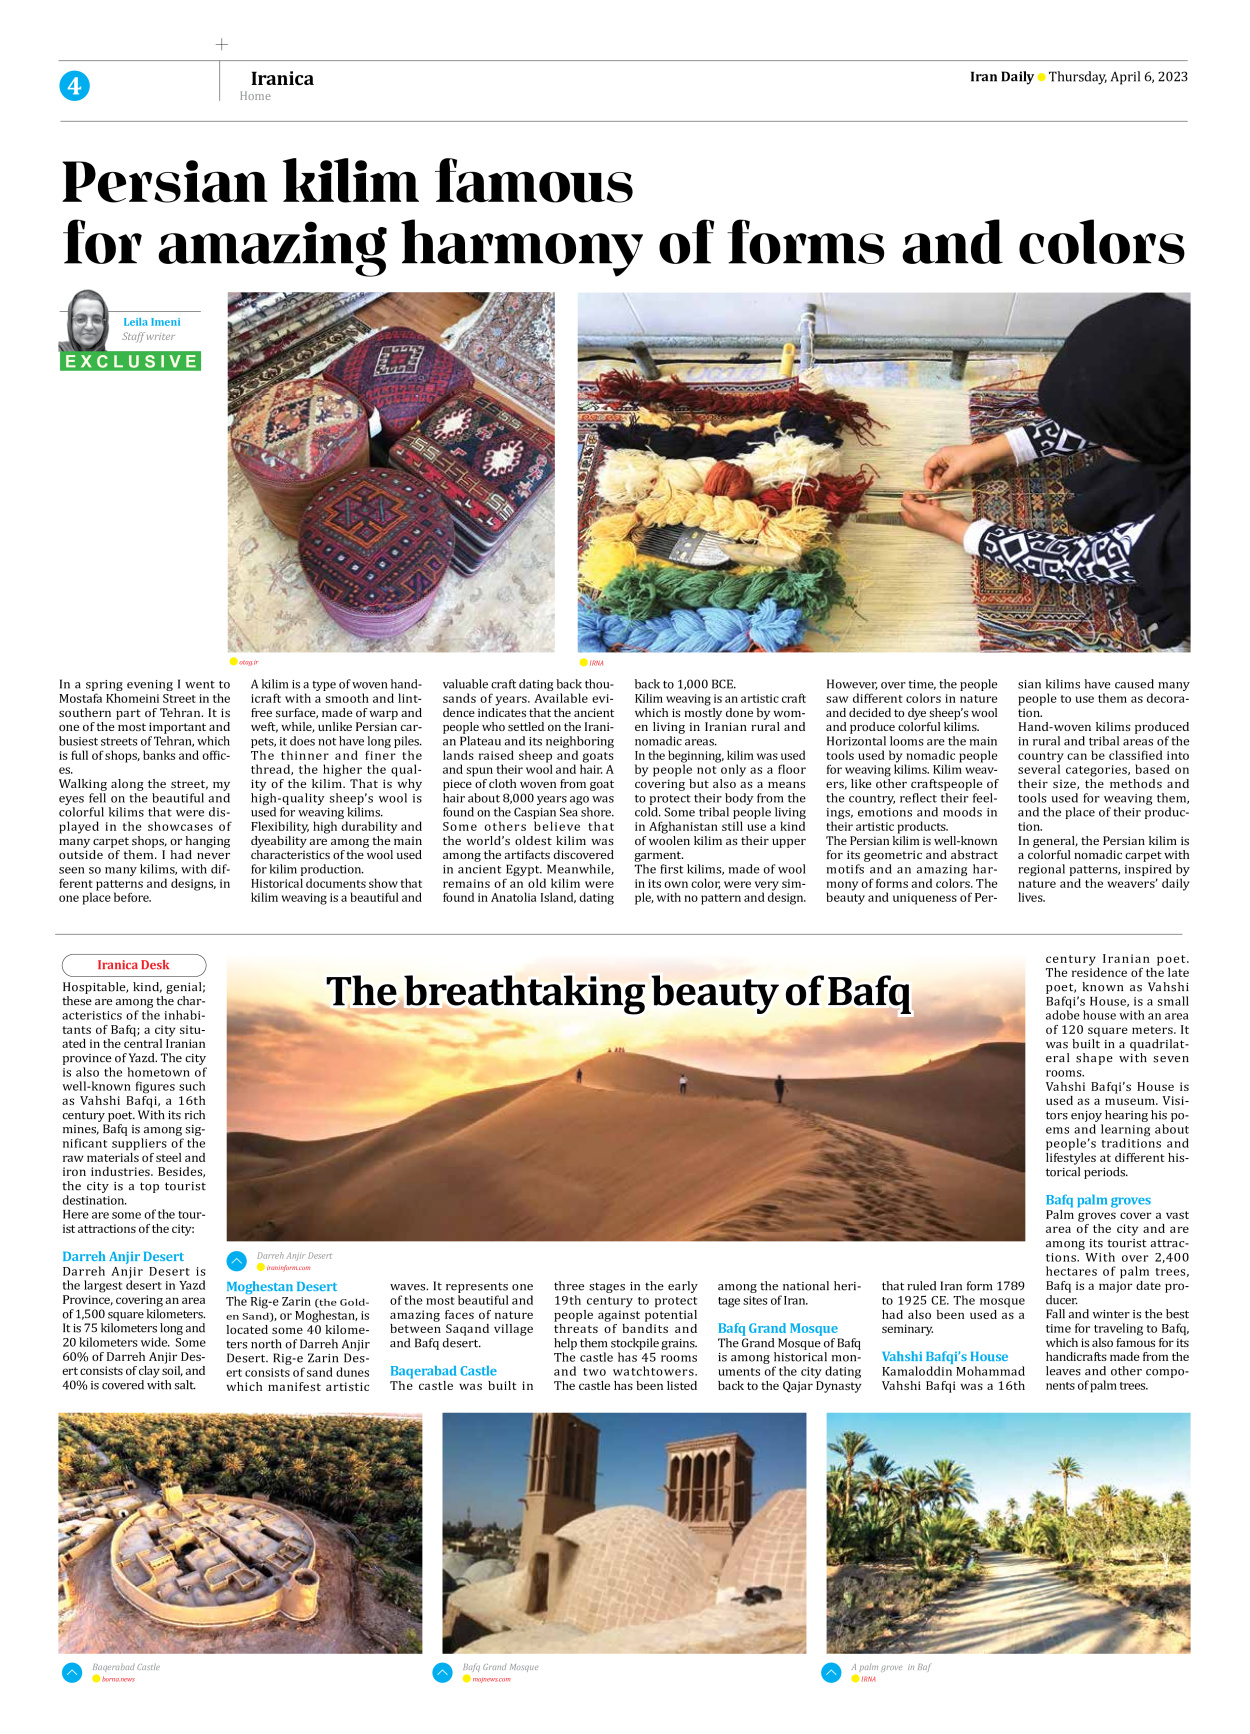 Iran Daily - Number Seven Thousand Two Hundred and Sixty Three - 06 April 2023 - Page 4